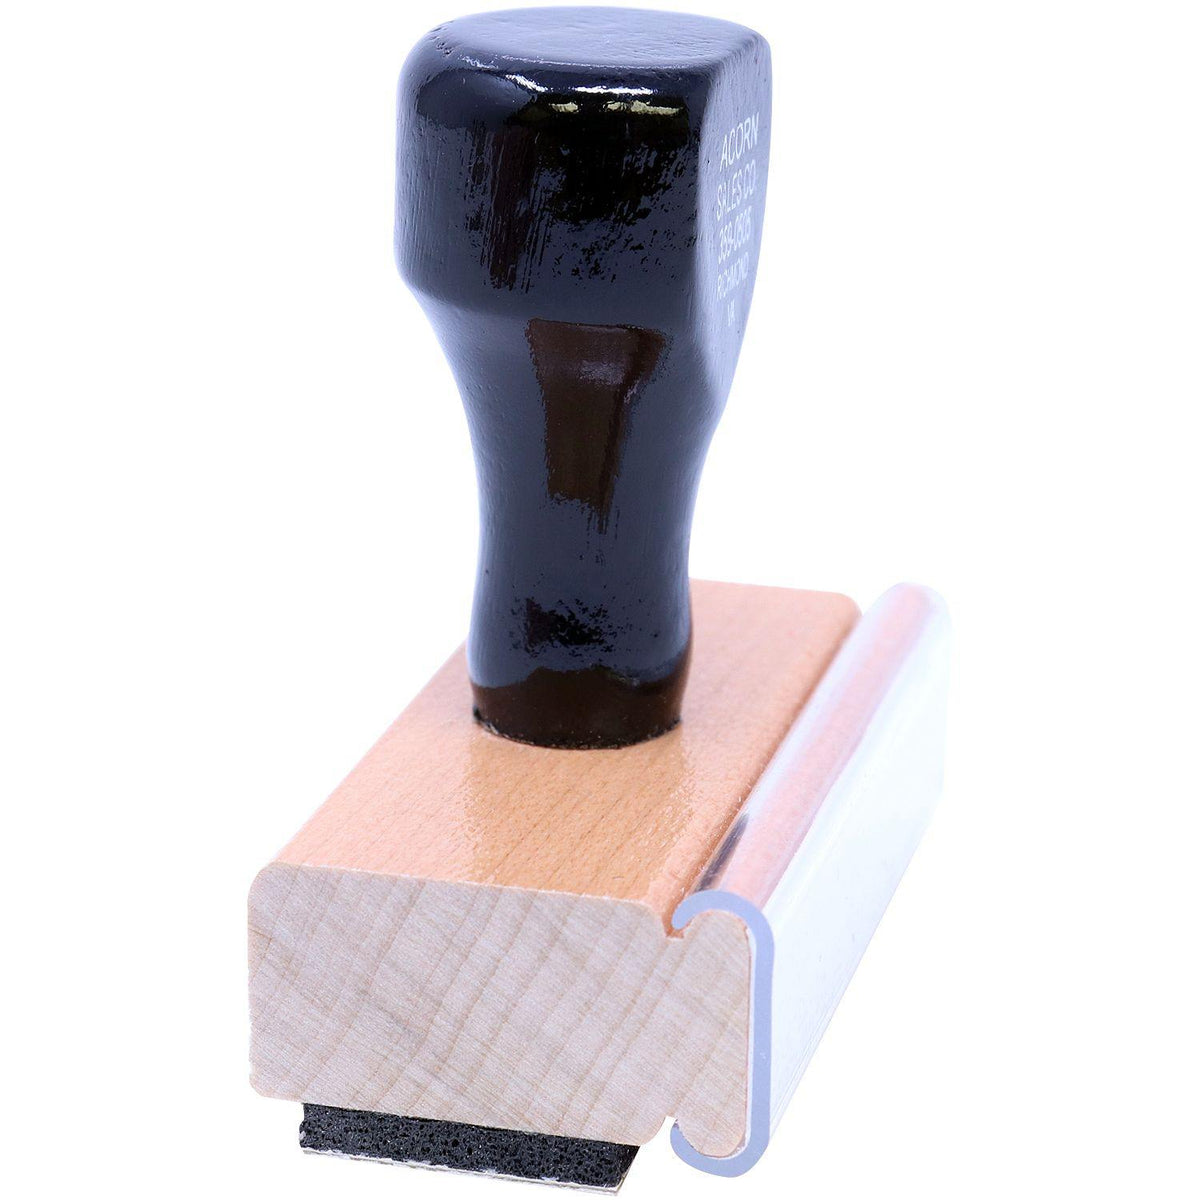 Side View of Large Bravo Rubber Stamp at an Angle